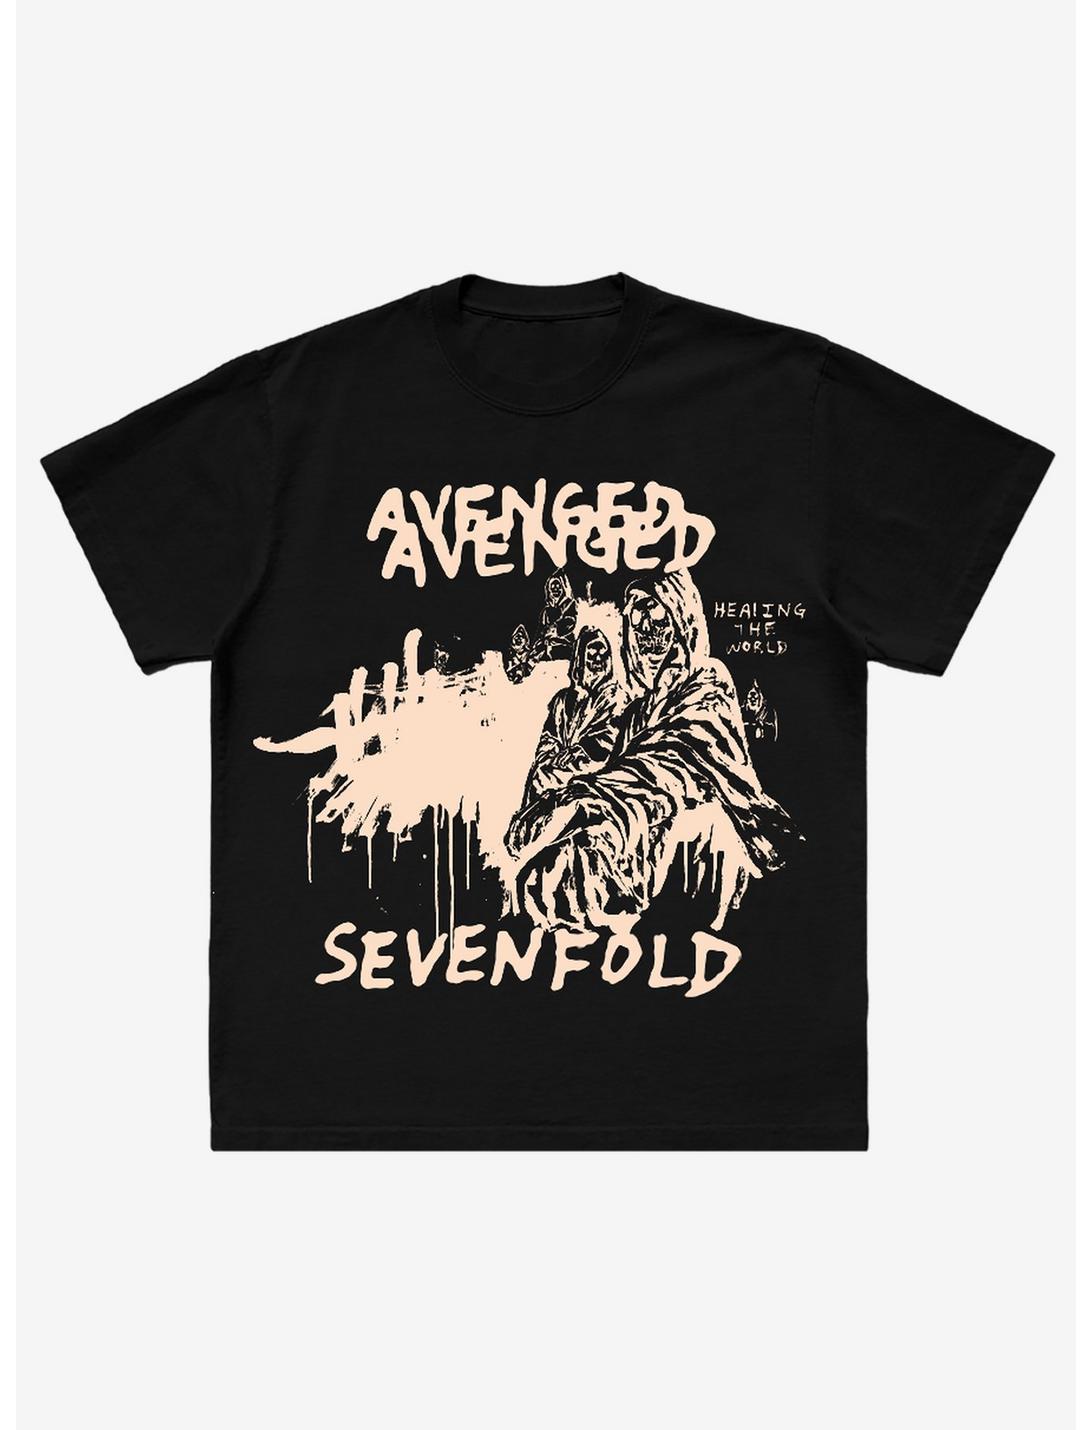 Avenged Sevenfold Life Is But A Dream Healing The World T-Shirt, BLACK, hi-res